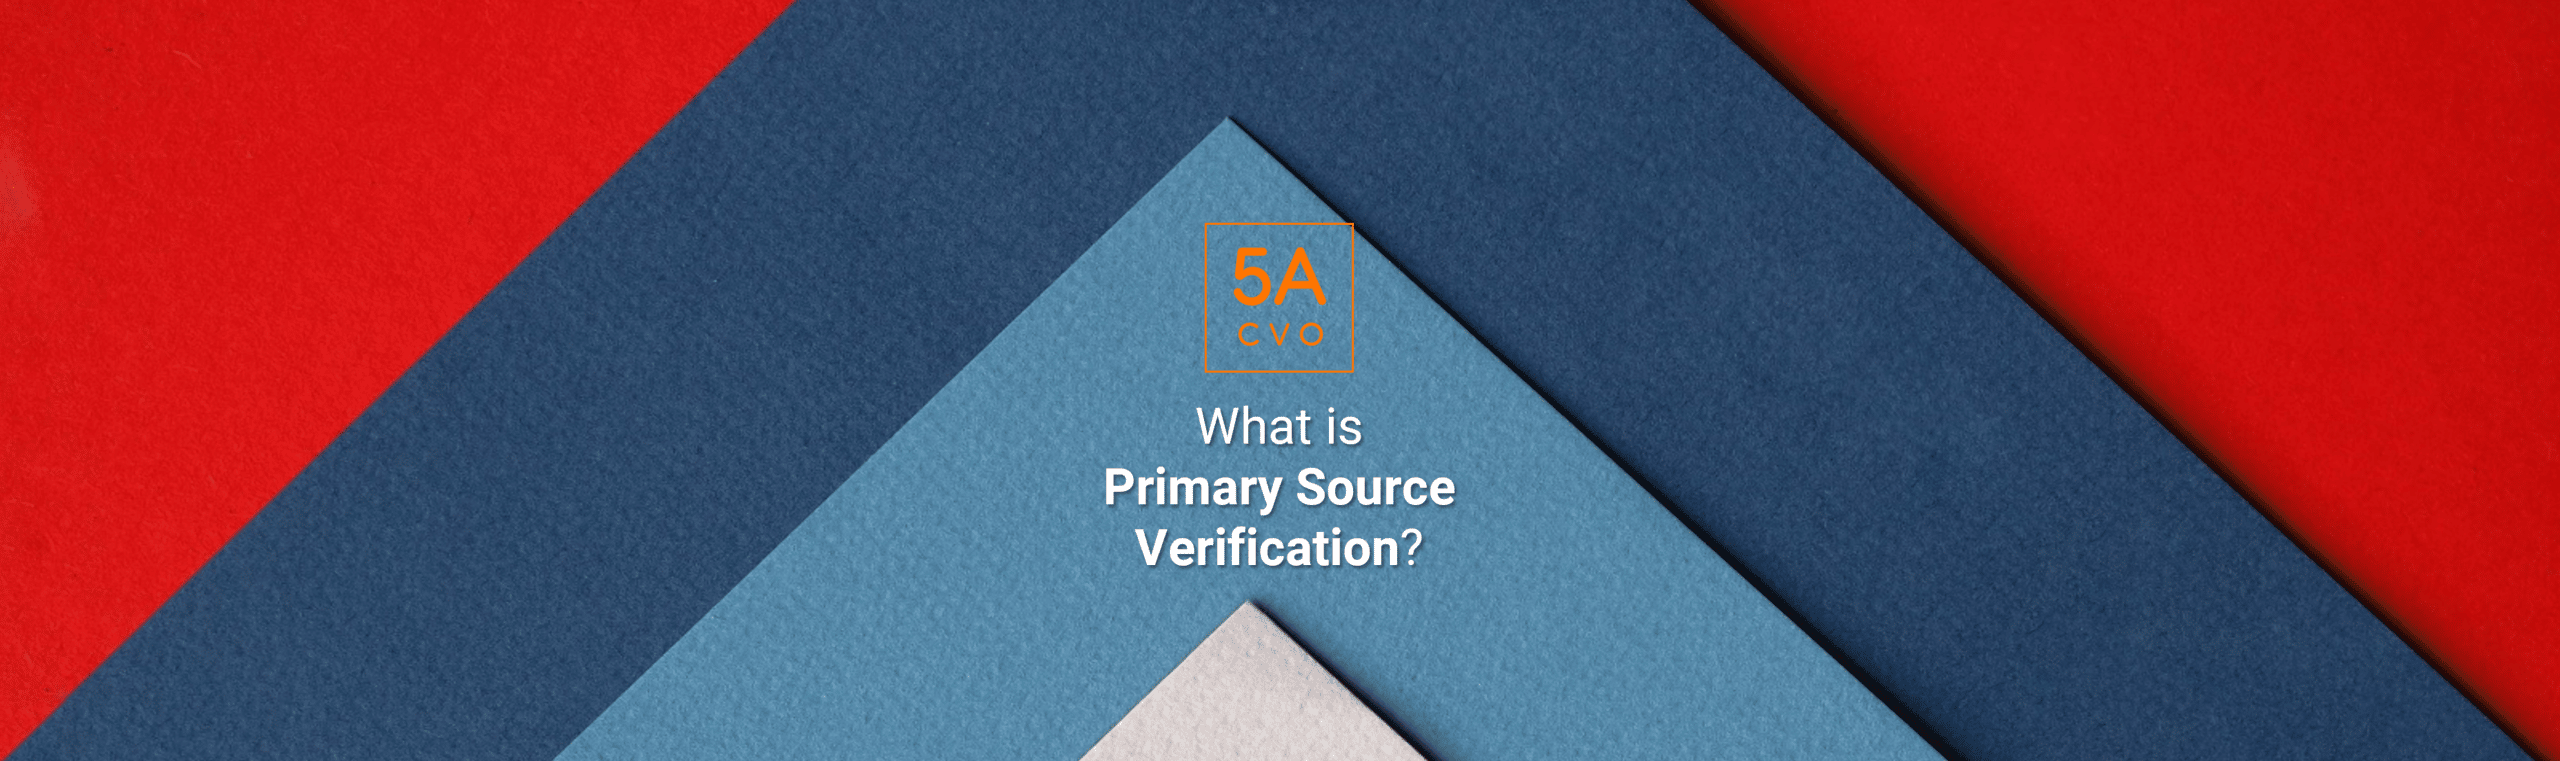 What Is Primary Source Verification - Psv